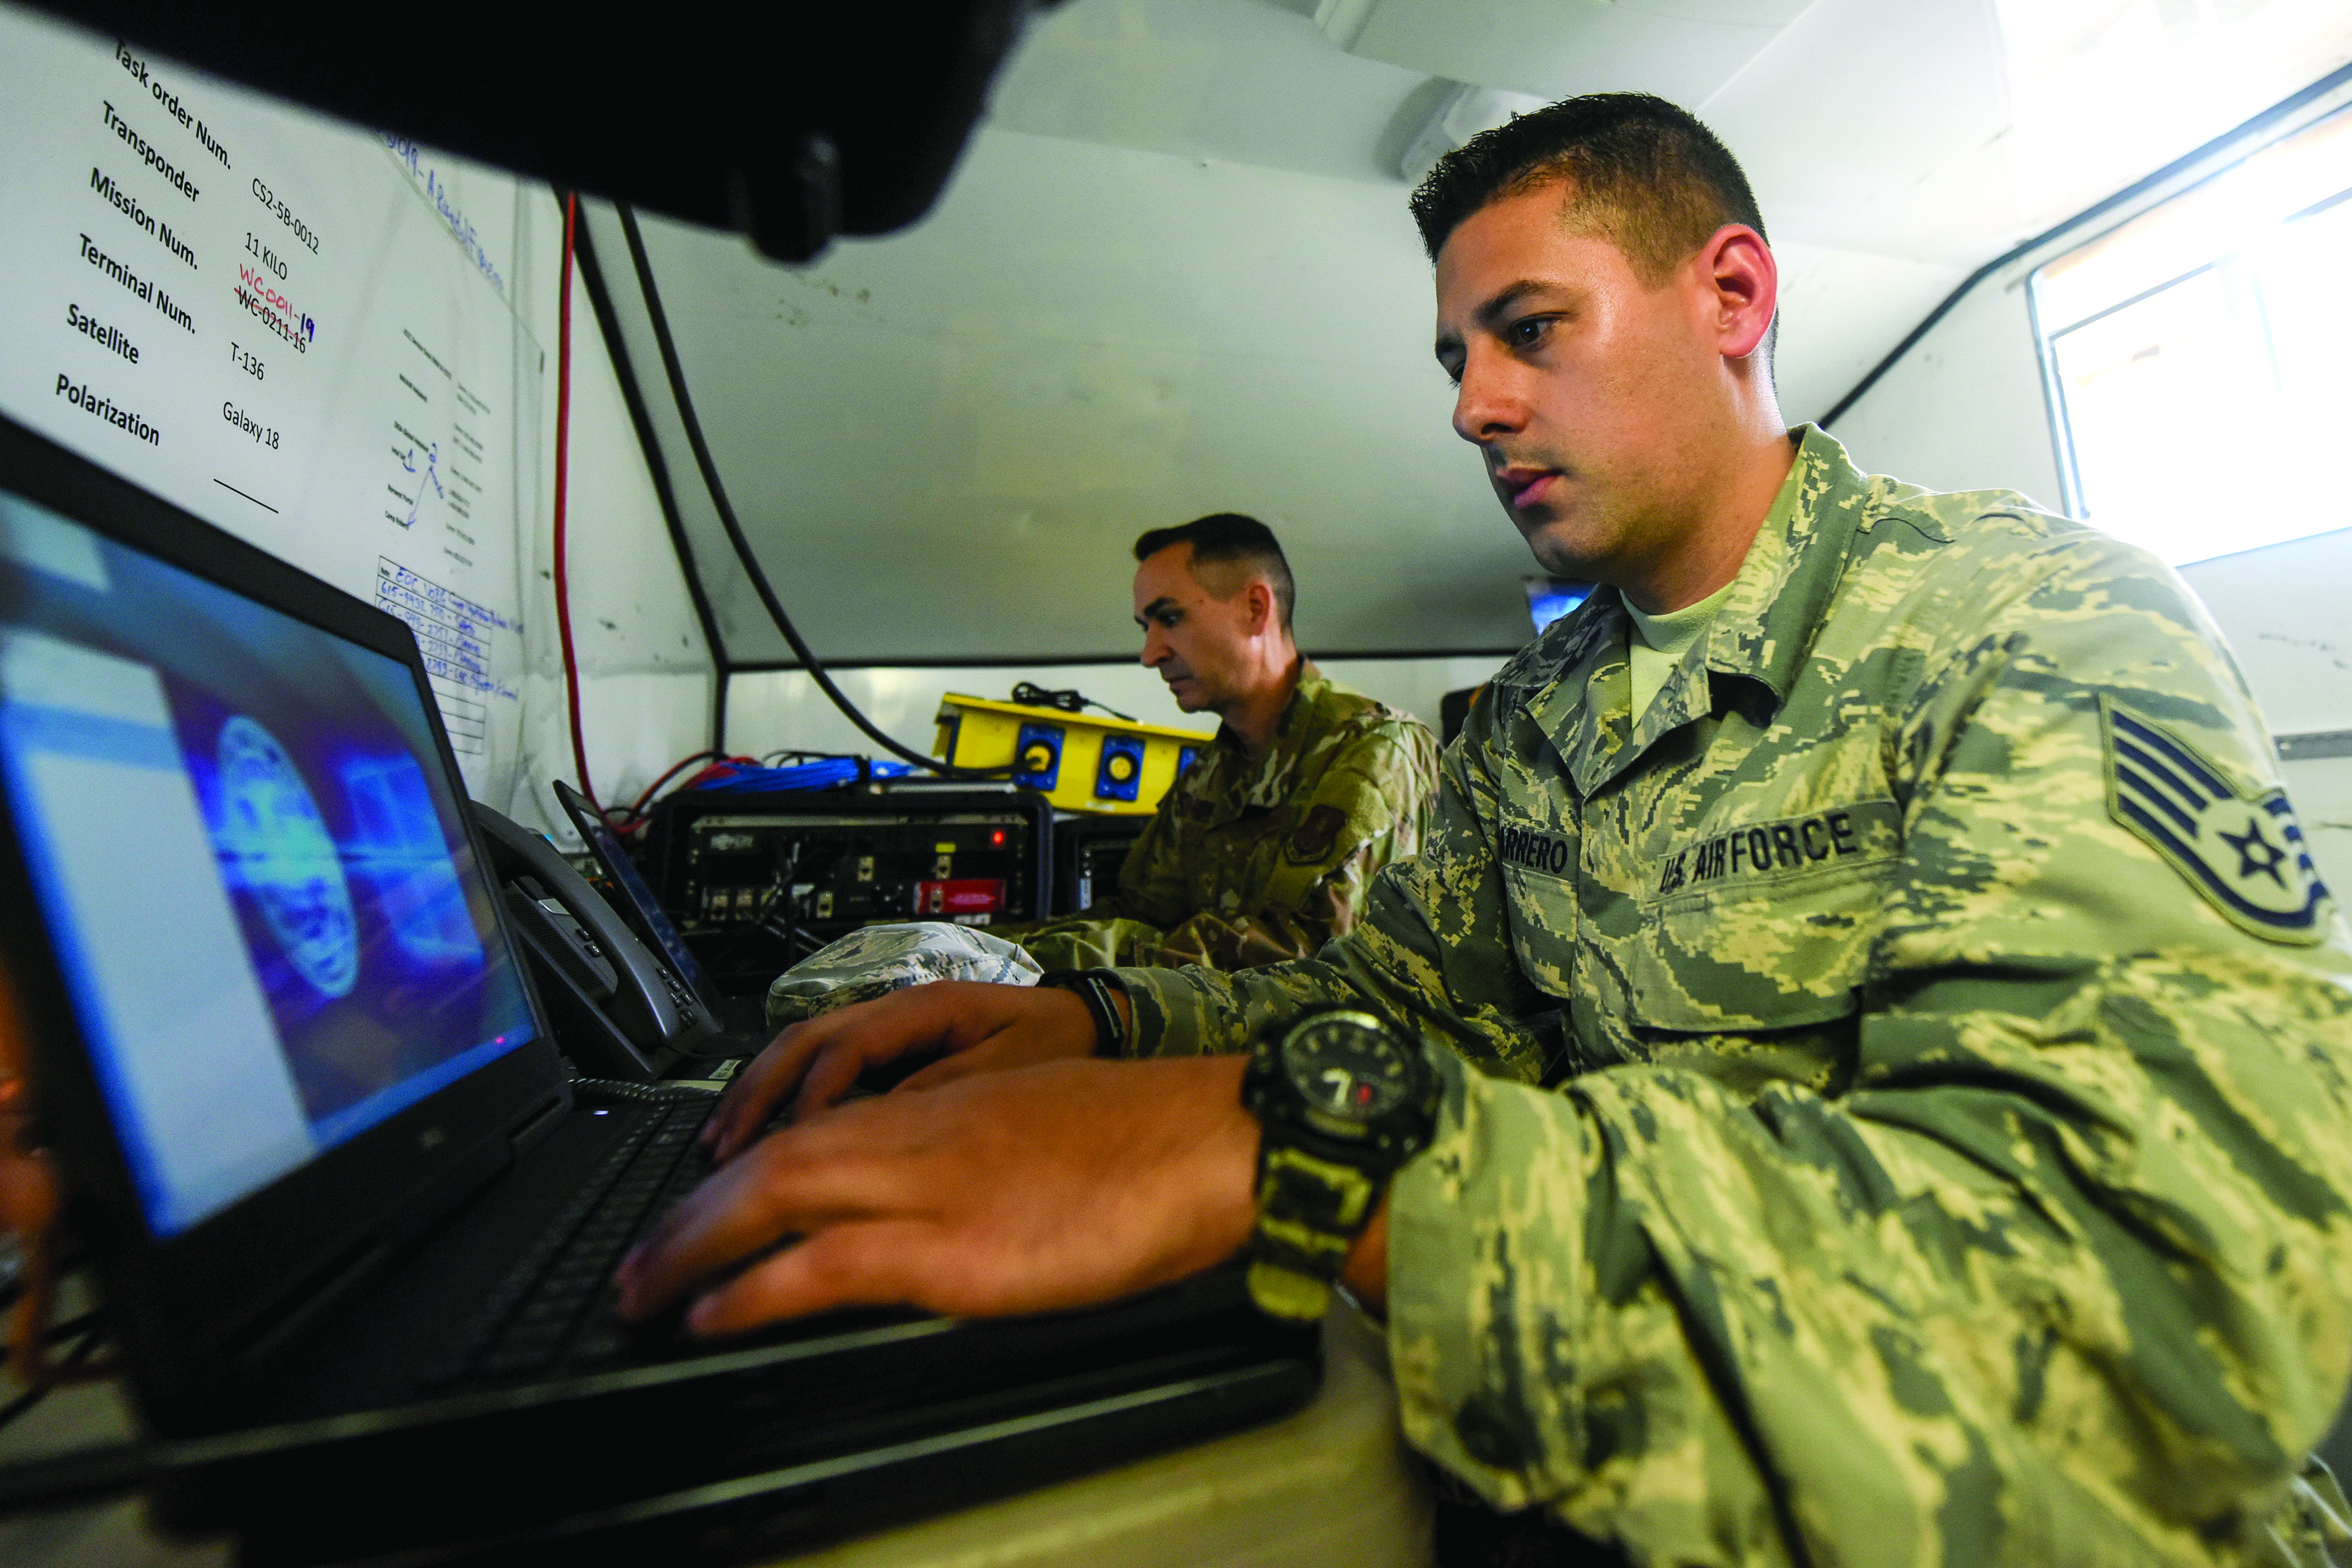 Source: DoD, An Air National Guard staff sergeant works at a command and control center in Cayey, Puerto Rico.